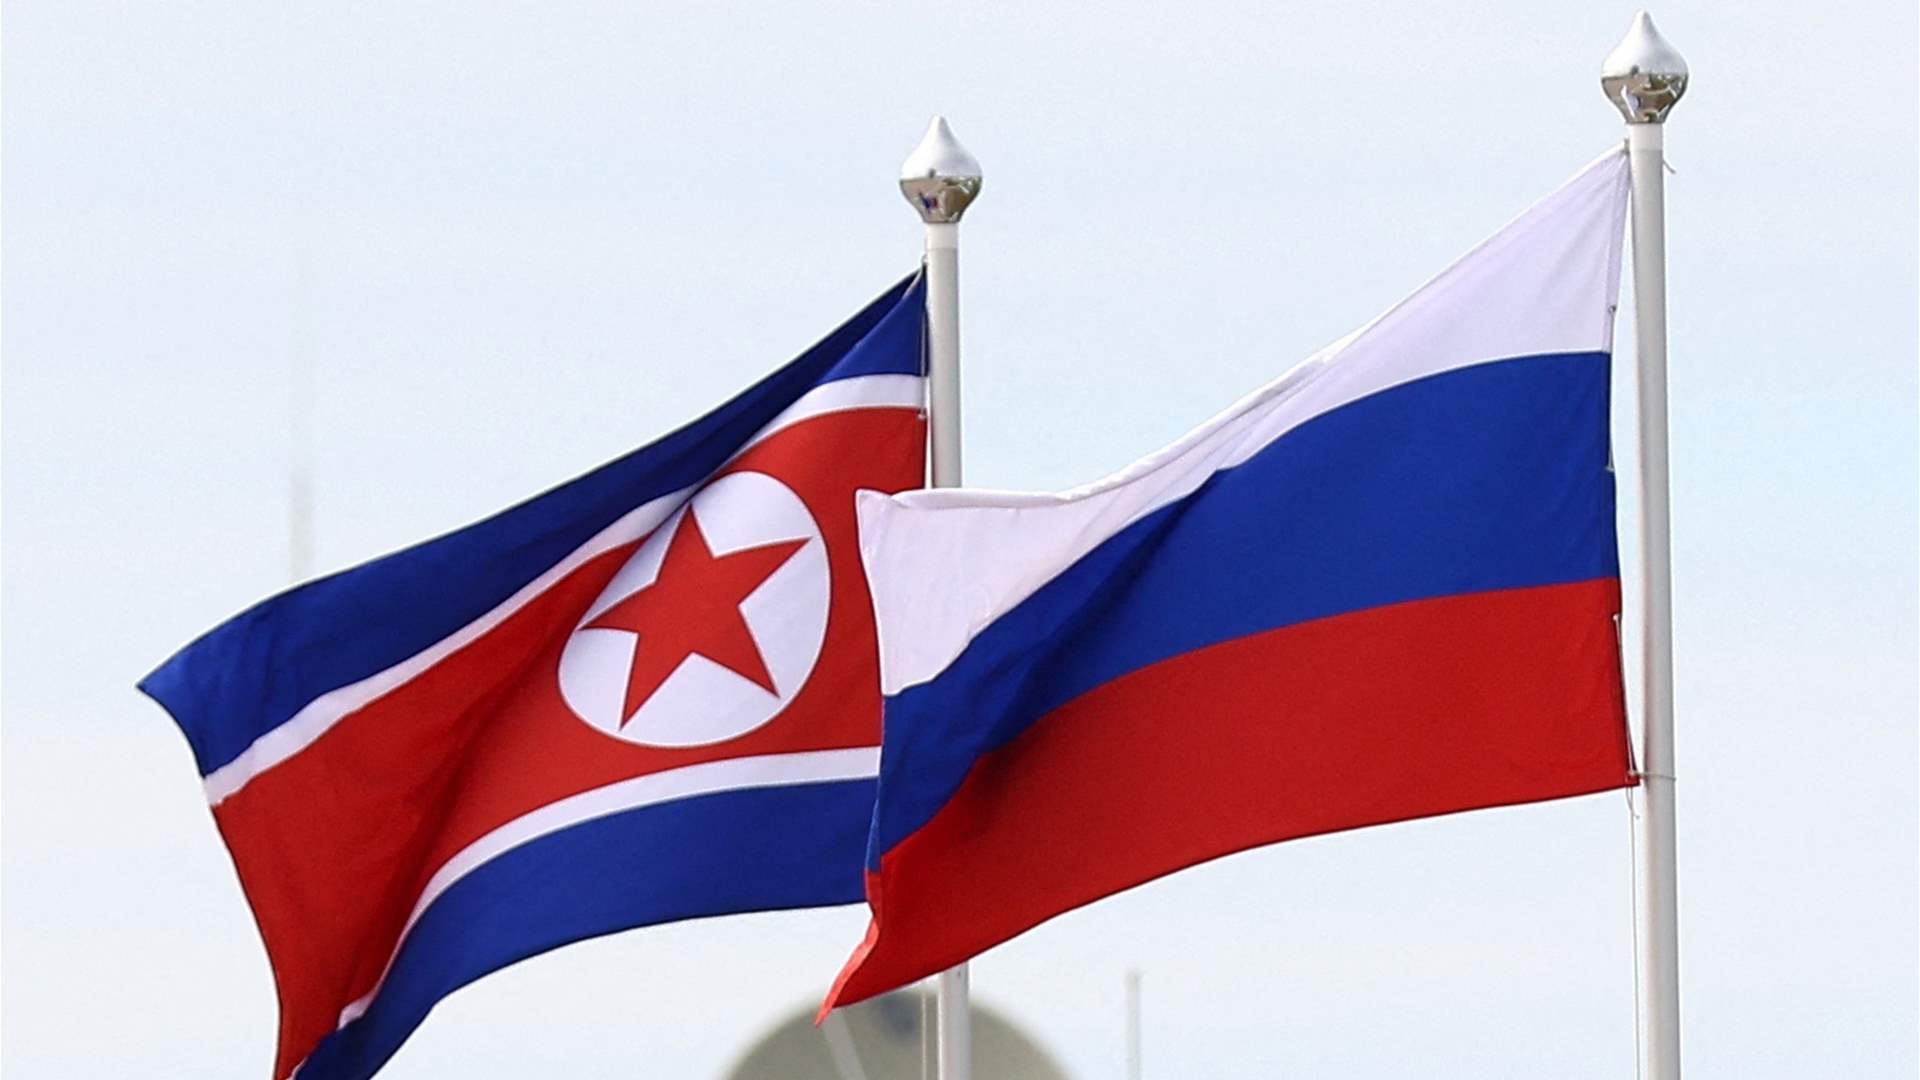 North Korea&#39;s foreign minister to visit Russia - KCNA